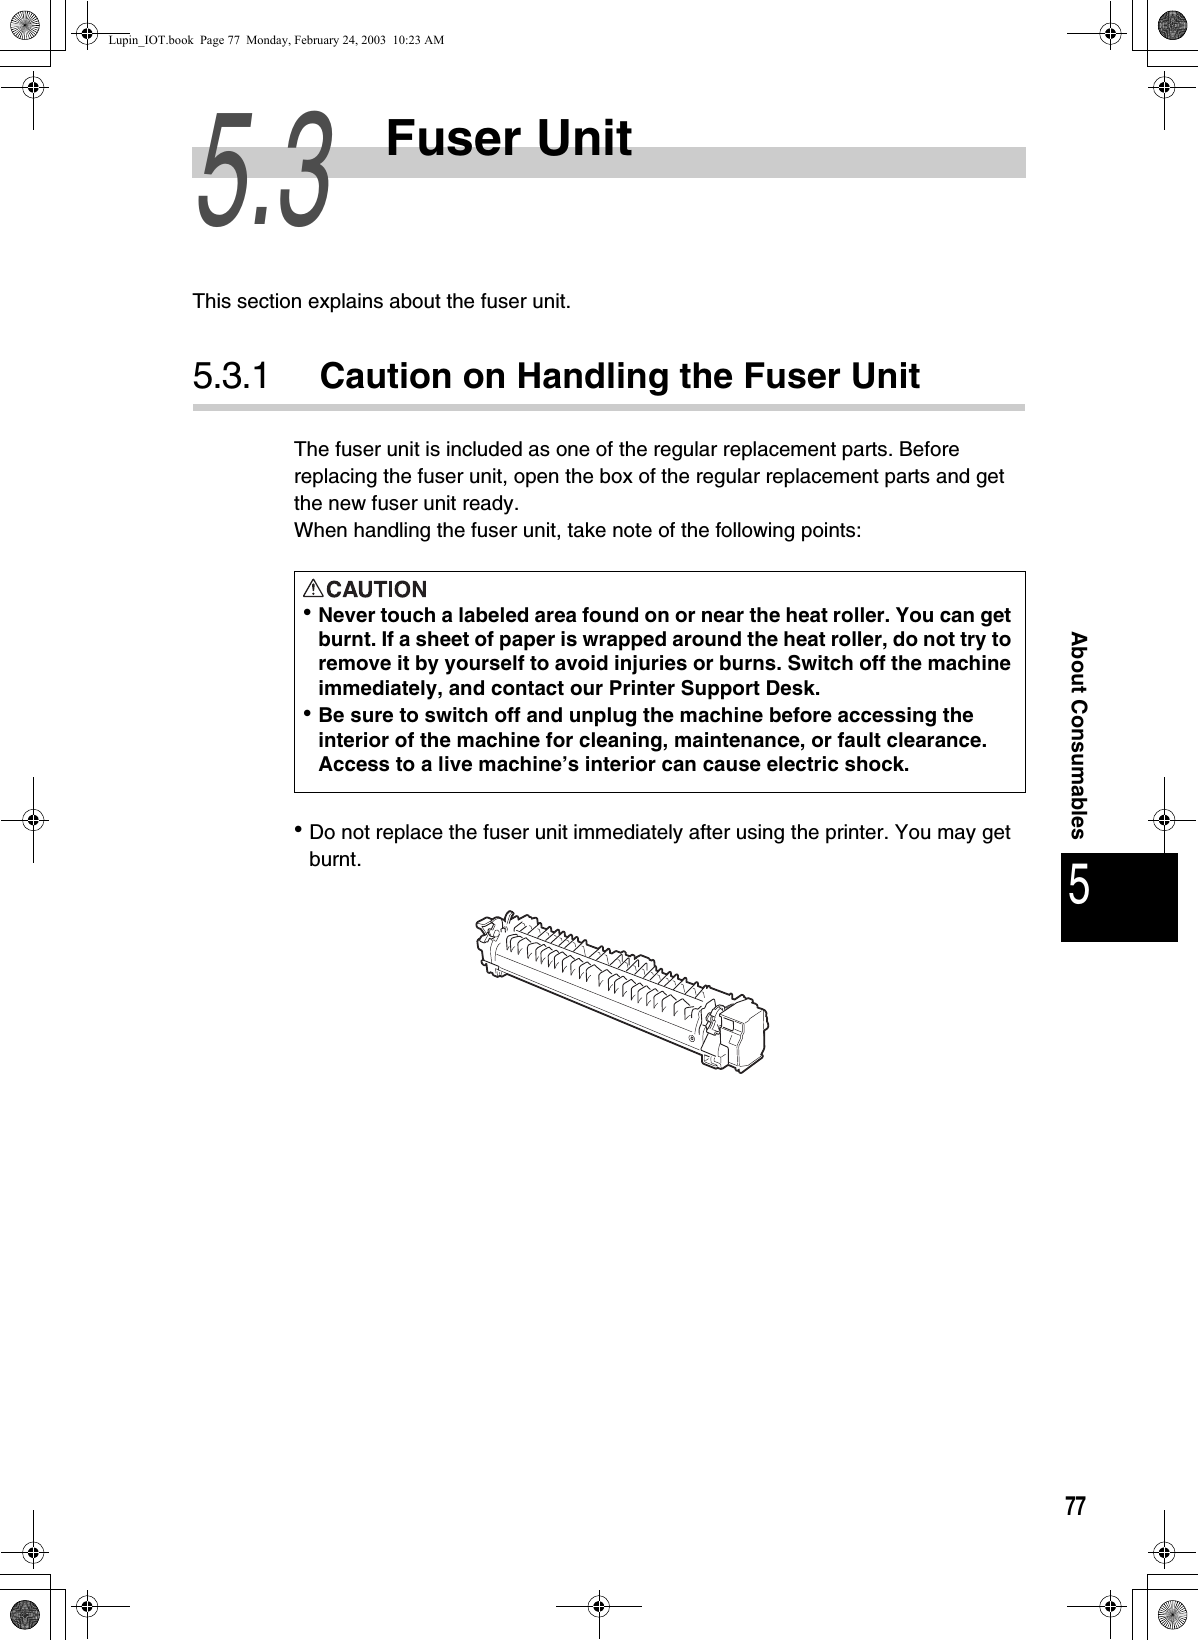 775About Consumables5.3Fuser UnitThis section explains about the fuser unit. 5.3.1 Caution on Handling the Fuser UnitThe fuser unit is included as one of the regular replacement parts. Before replacing the fuser unit, open the box of the regular replacement parts and get the new fuser unit ready. When handling the fuser unit, take note of the following points:zDo not replace the fuser unit immediately after using the printer. You may get burnt. zNever touch a labeled area found on or near the heat roller. You can get burnt. If a sheet of paper is wrapped around the heat roller, do not try to remove it by yourself to avoid injuries or burns. Switch off the machine immediately, and contact our Printer Support Desk.zBe sure to switch off and unplug the machine before accessing the interior of the machine for cleaning, maintenance, or fault clearance.  Access to a live machine’s interior can cause electric shock.Lupin_IOT.book  Page 77  Monday, February 24, 2003  10:23 AM